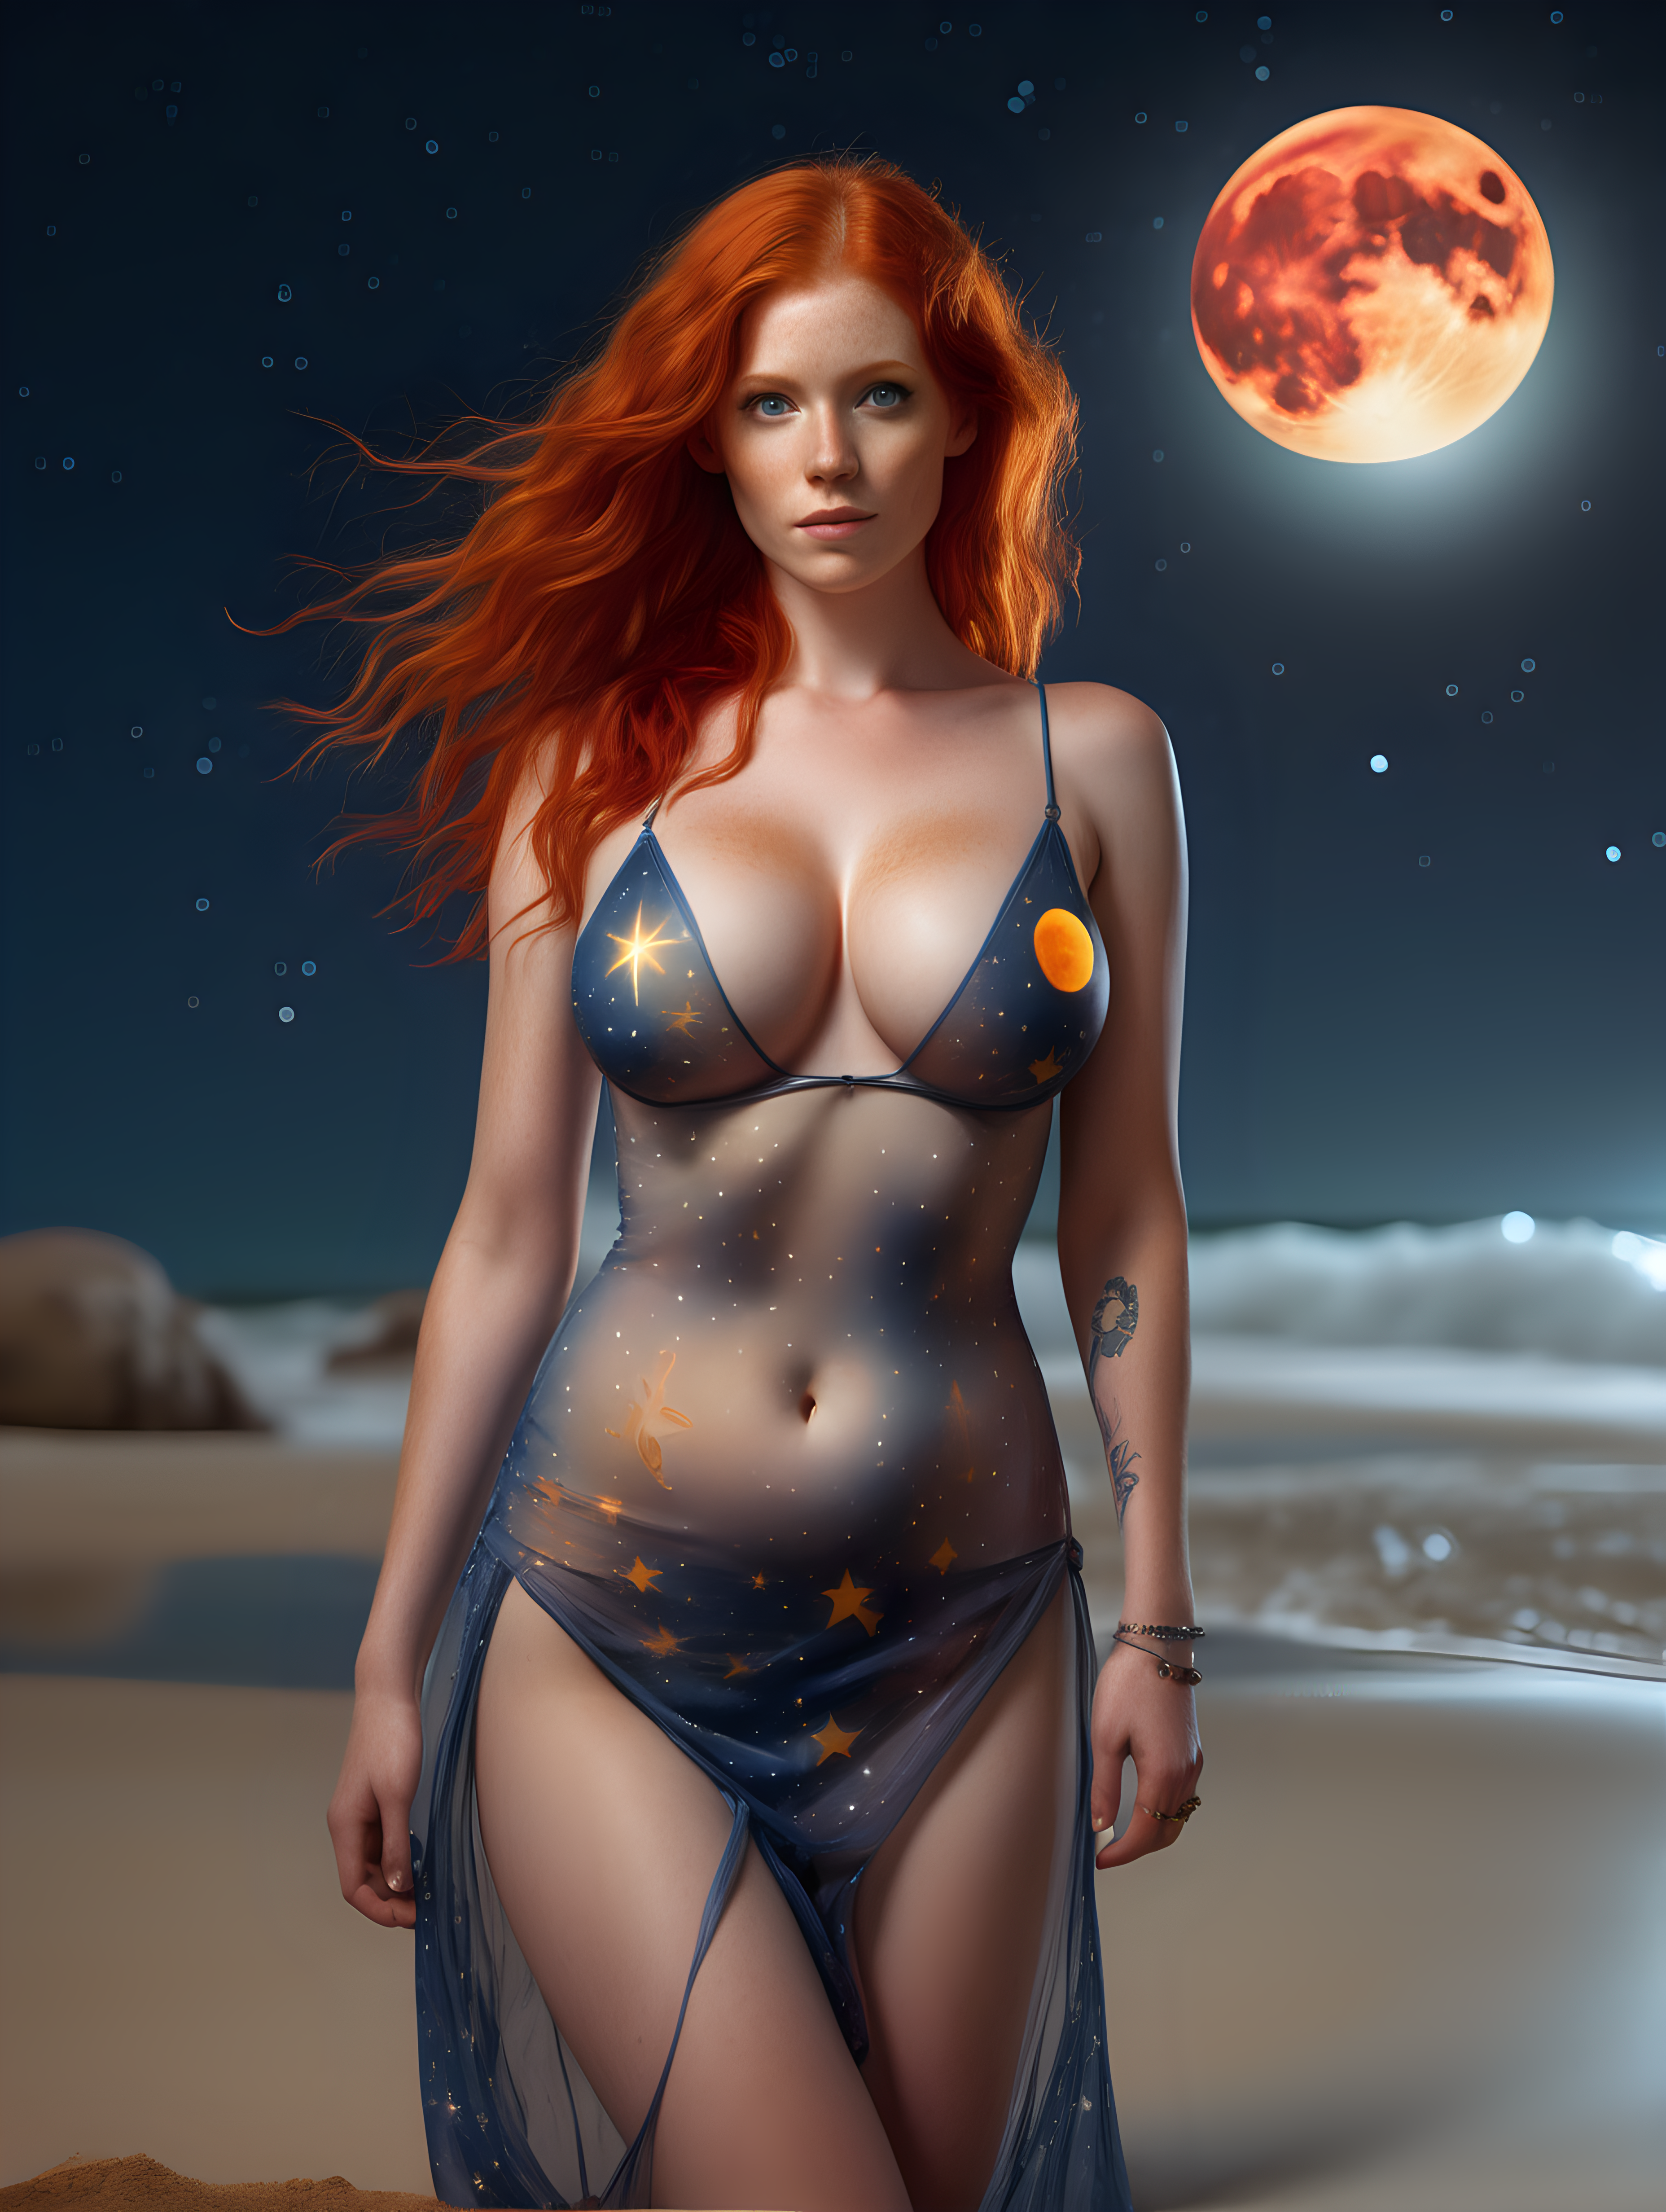 ultra-realistic high resolution and highly detailed photo of a female human with fiery red hair and large firm breasts, she has draconic symbols on her arms and body, wearing nothing except a colourful transparent summer dress, she is on a beach with the stars and the moon in the background, facing the camera